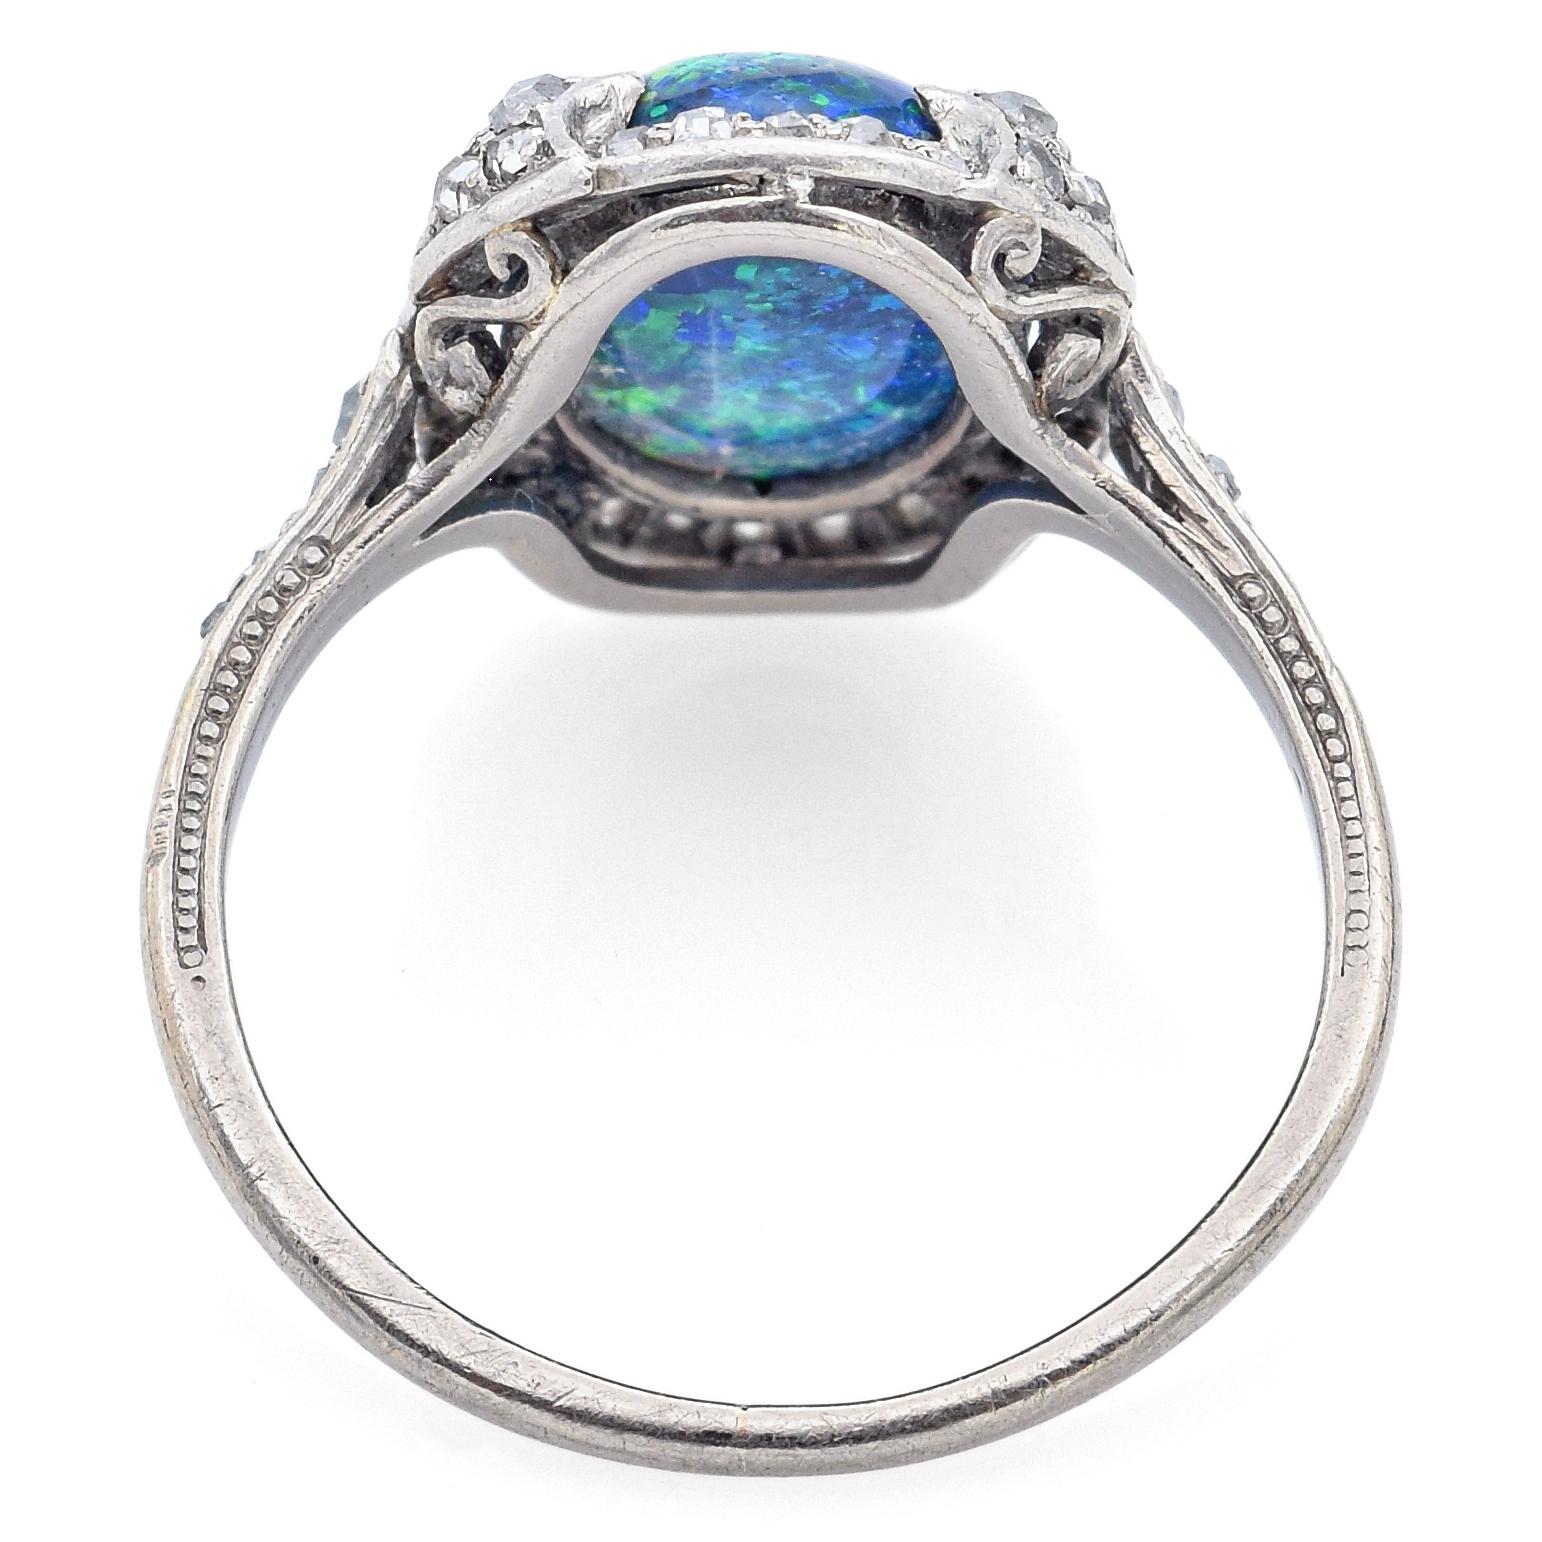 Antique 2.19 Ct Black Opal & Rose Cut Diamond Platinum Ring Size 5.5 In Good Condition For Sale In New York, NY